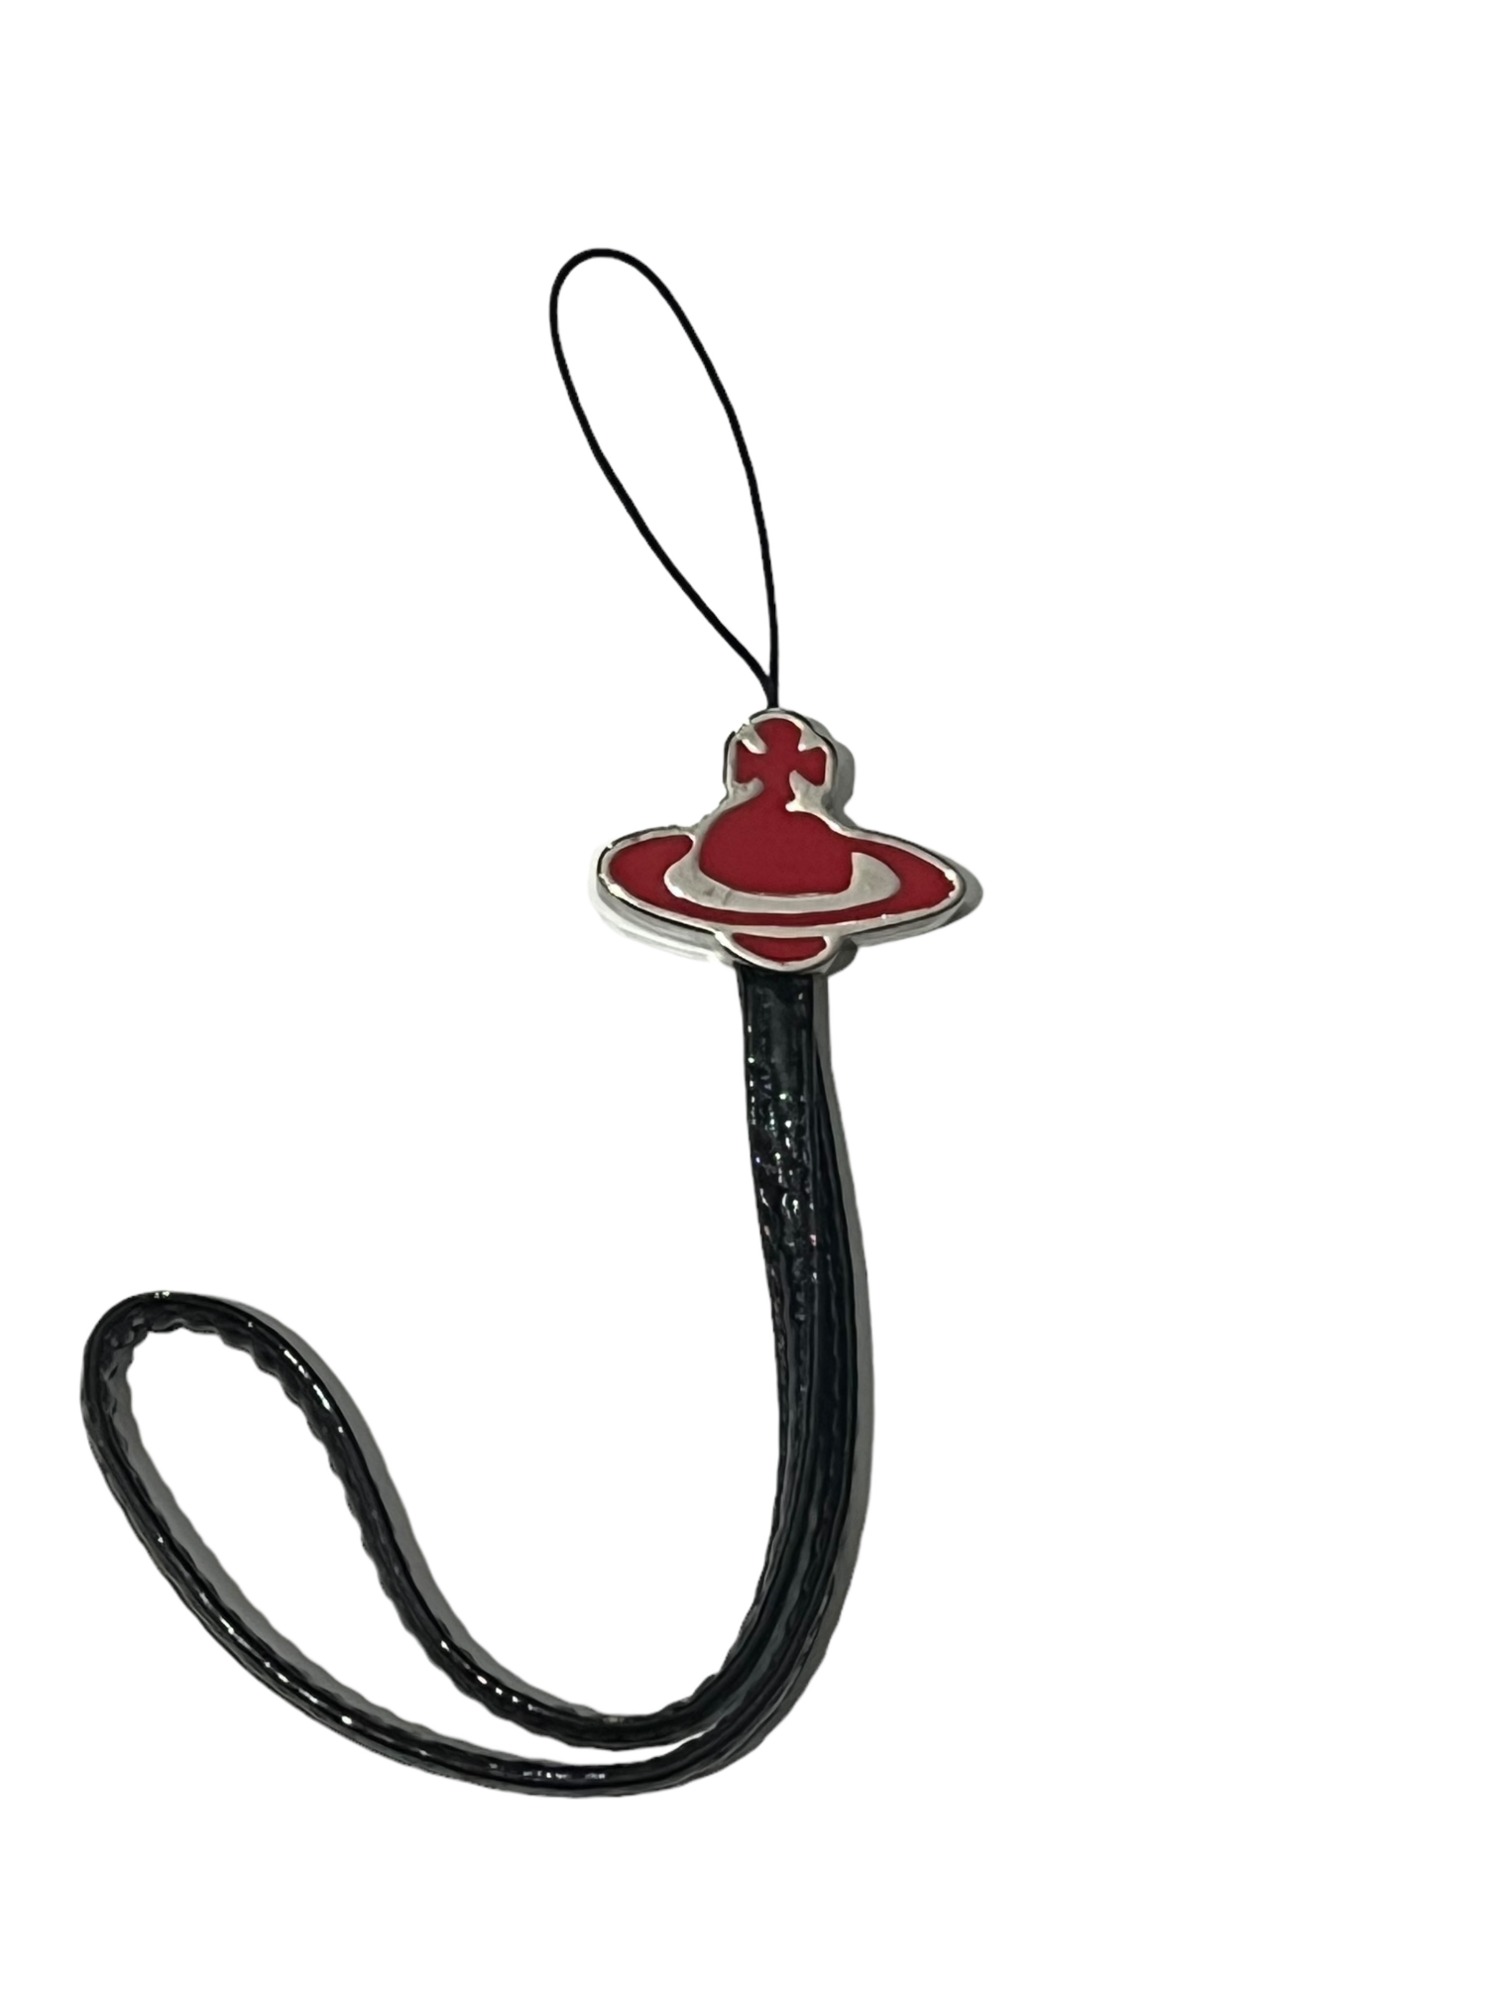 Vivienne Wsetwood Used Lariat Strap Key Ring (Red)